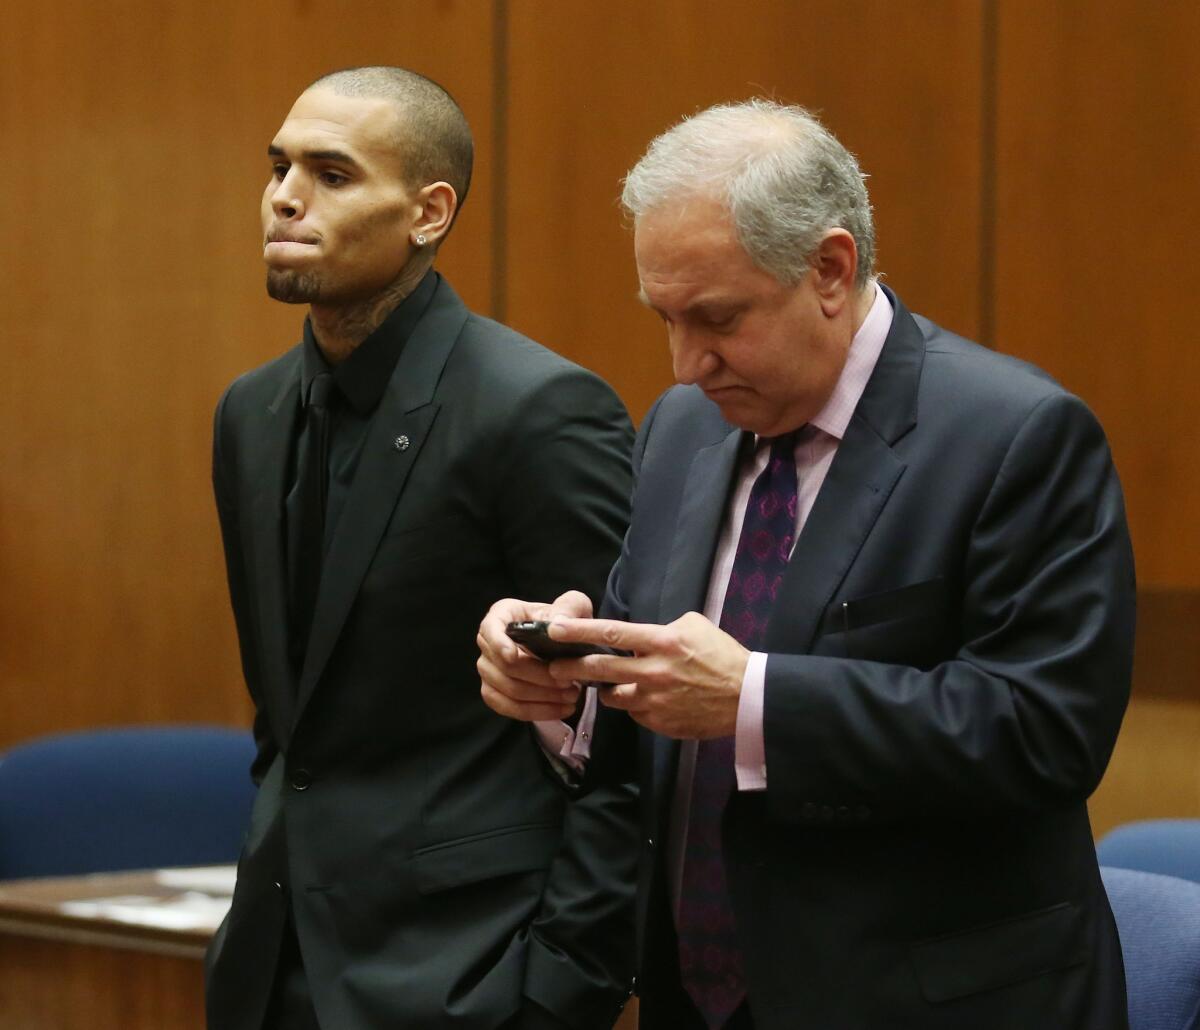 Chris Brown appears with his attorney, Mark Geragos, in Los Angeles County court.